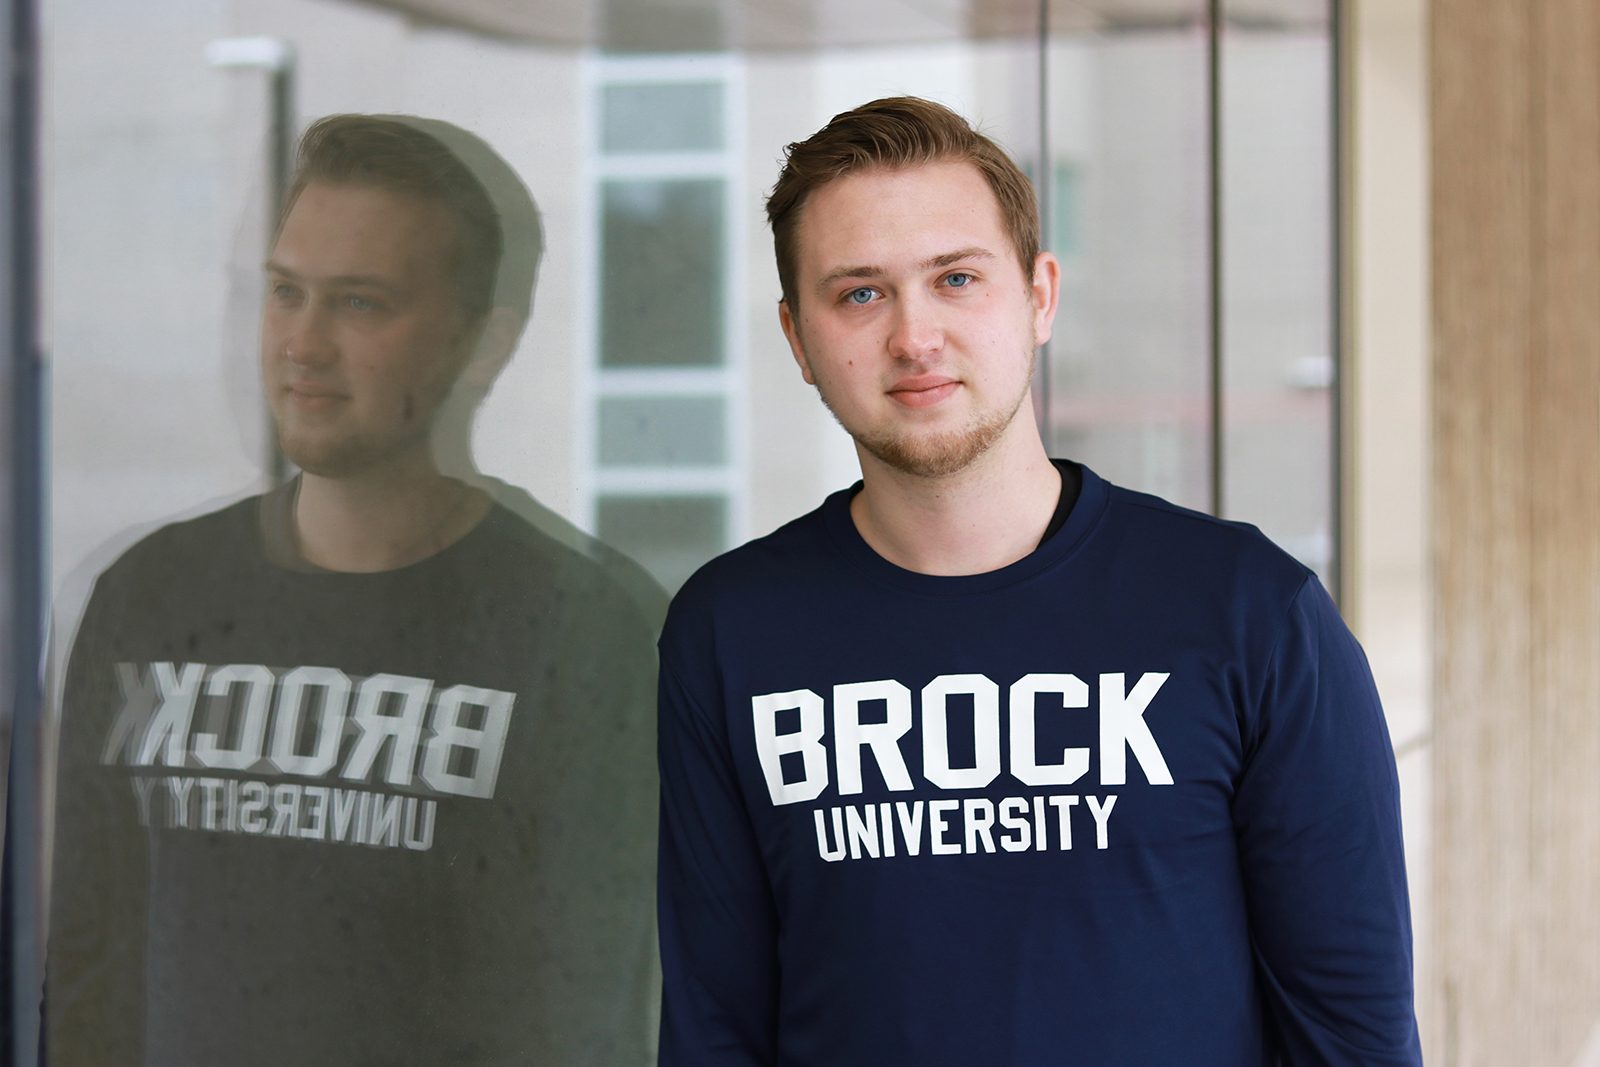 A young man leans against a glass wall, creating a reflection in the glass. He is wearing a blue long-sleeved shirt with ‘Brock University’ in white letters.